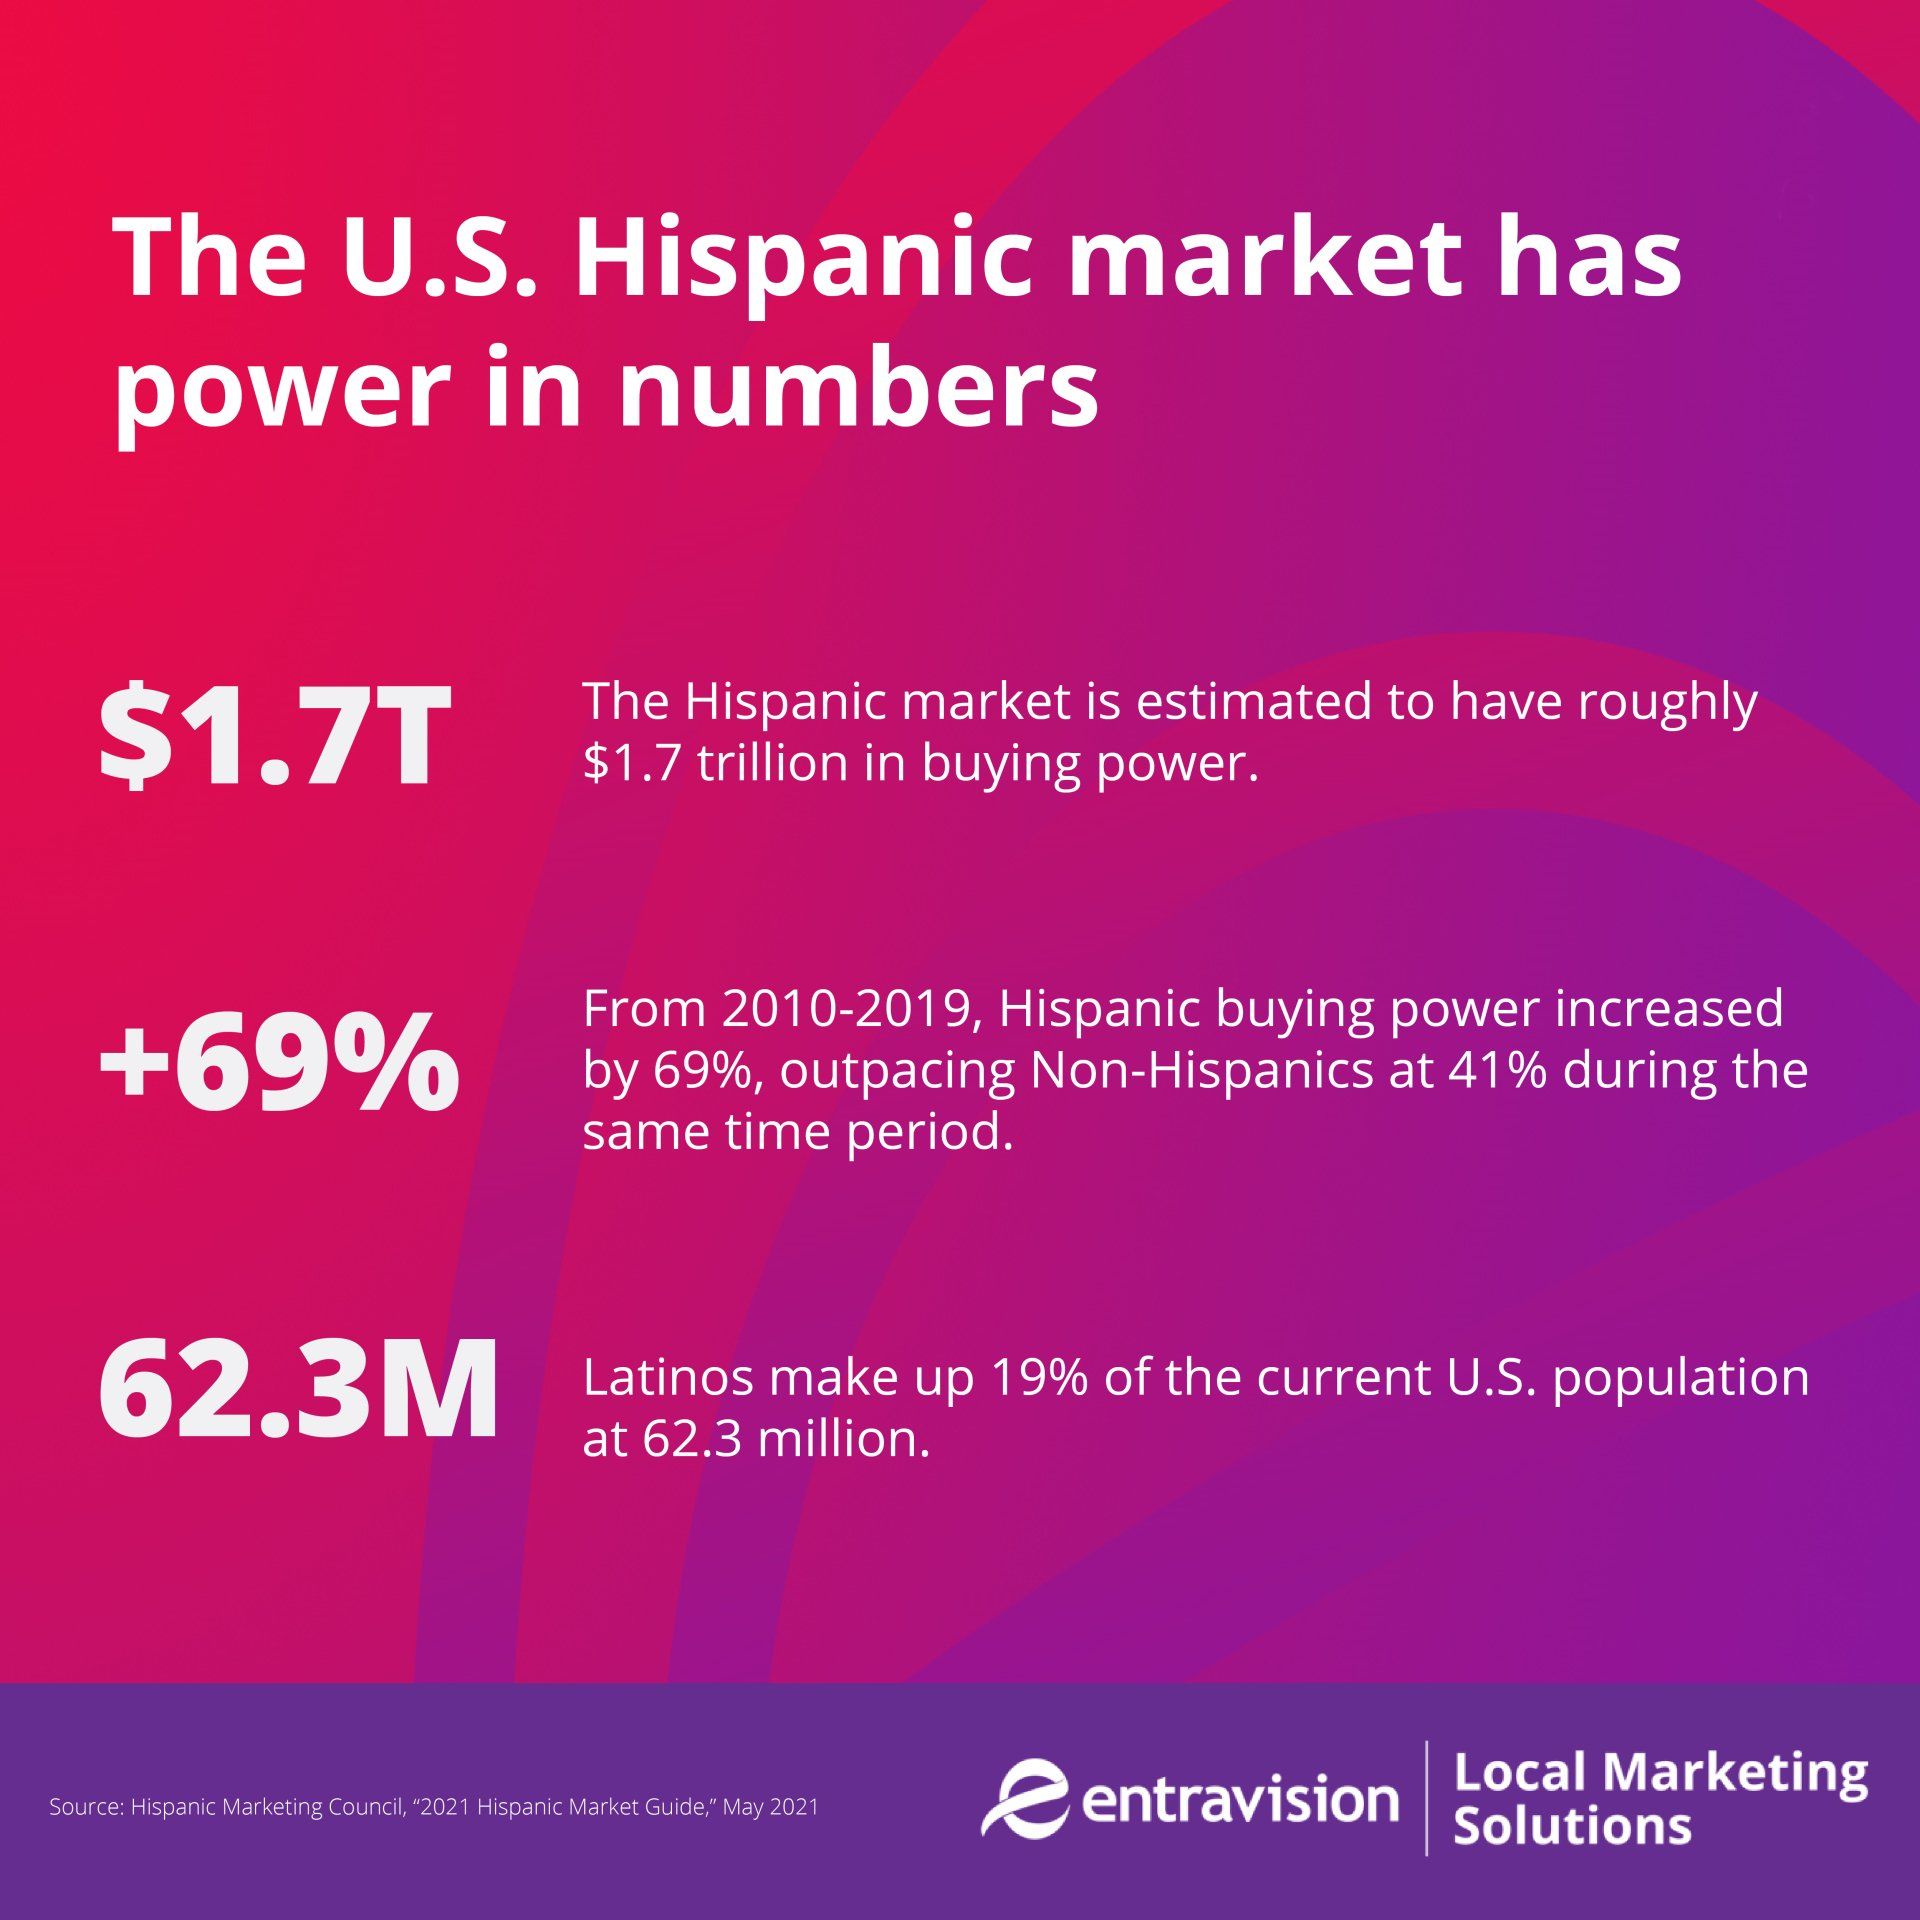 The Hispanic market has made major population and spending power gains. Using Hispanic marketing is a great way for businesses to connect with them!